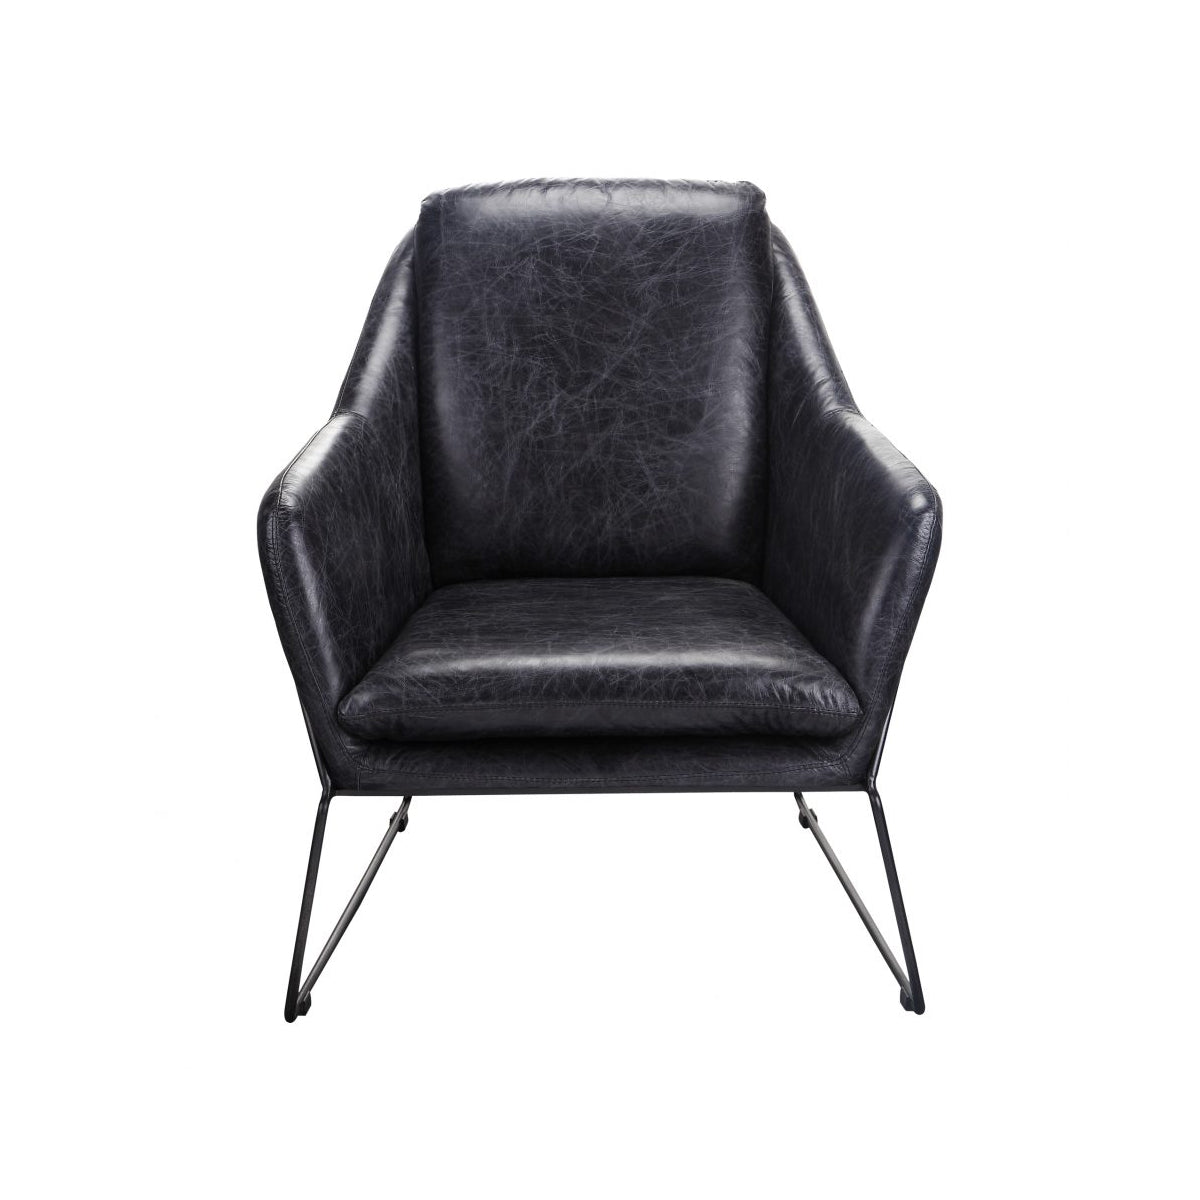 Load image into Gallery viewer, Greer Club Chair Occasional Chair Moe&amp;#39;s     Four Hands, Burke Decor, Mid Century Modern Furniture, Old Bones Furniture Company, Old Bones Co, Modern Mid Century, Designer Furniture, https://www.oldbonesco.com/
